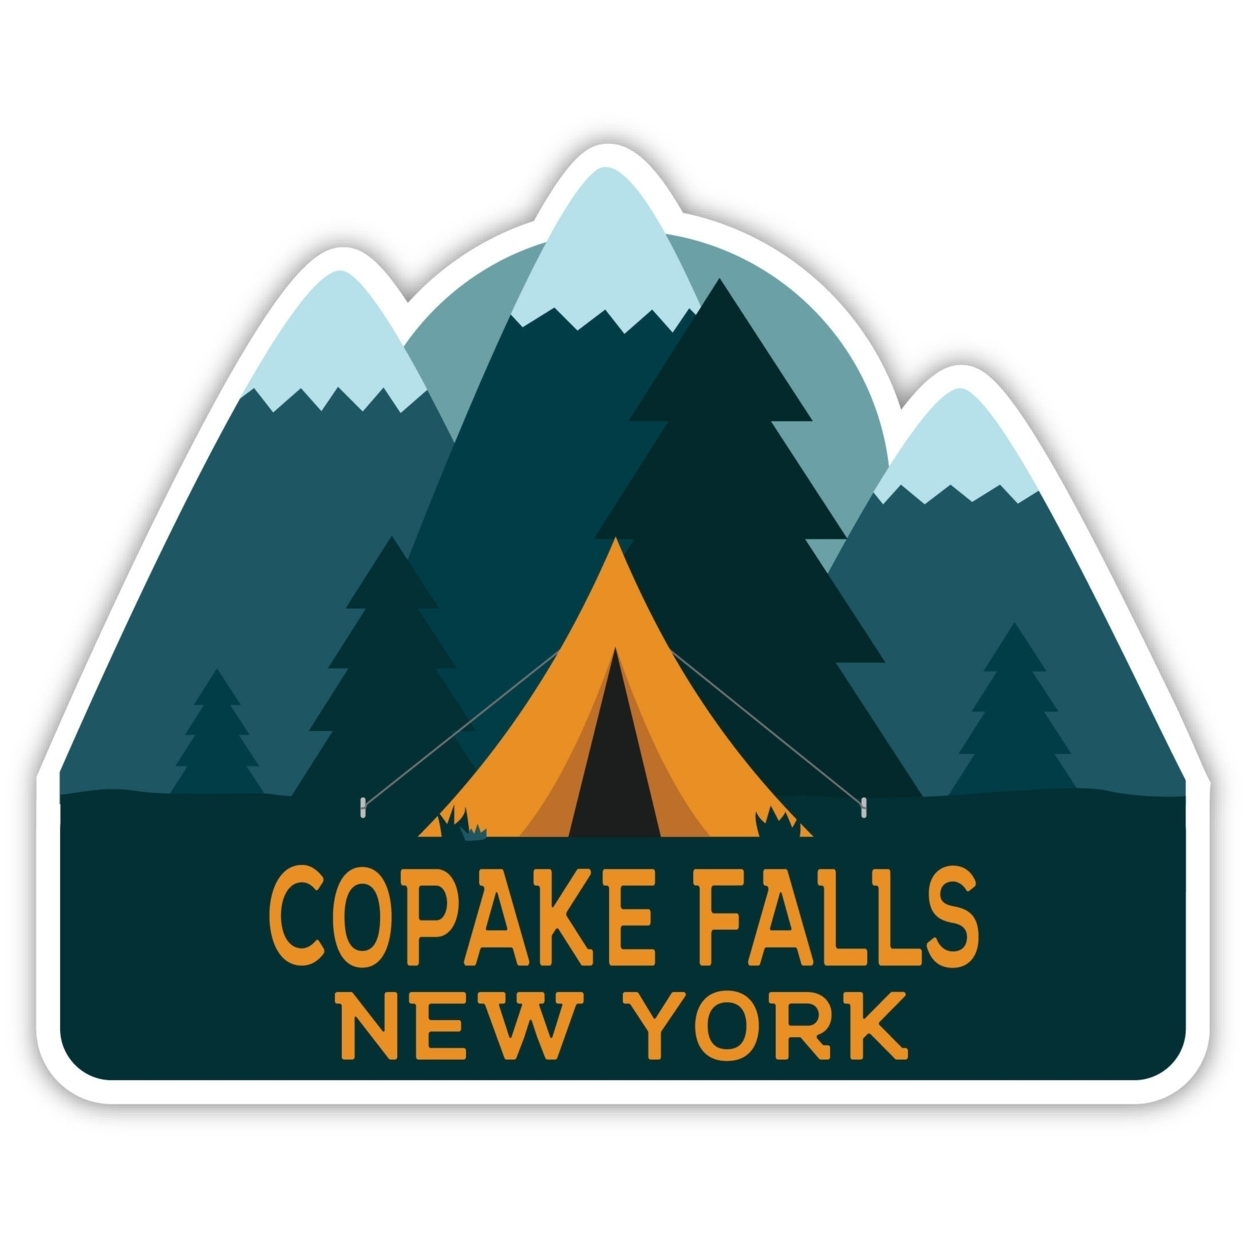 Copake Falls New York Souvenir Decorative Stickers (Choose Theme And Size) - 4-Pack, 6-Inch, Tent